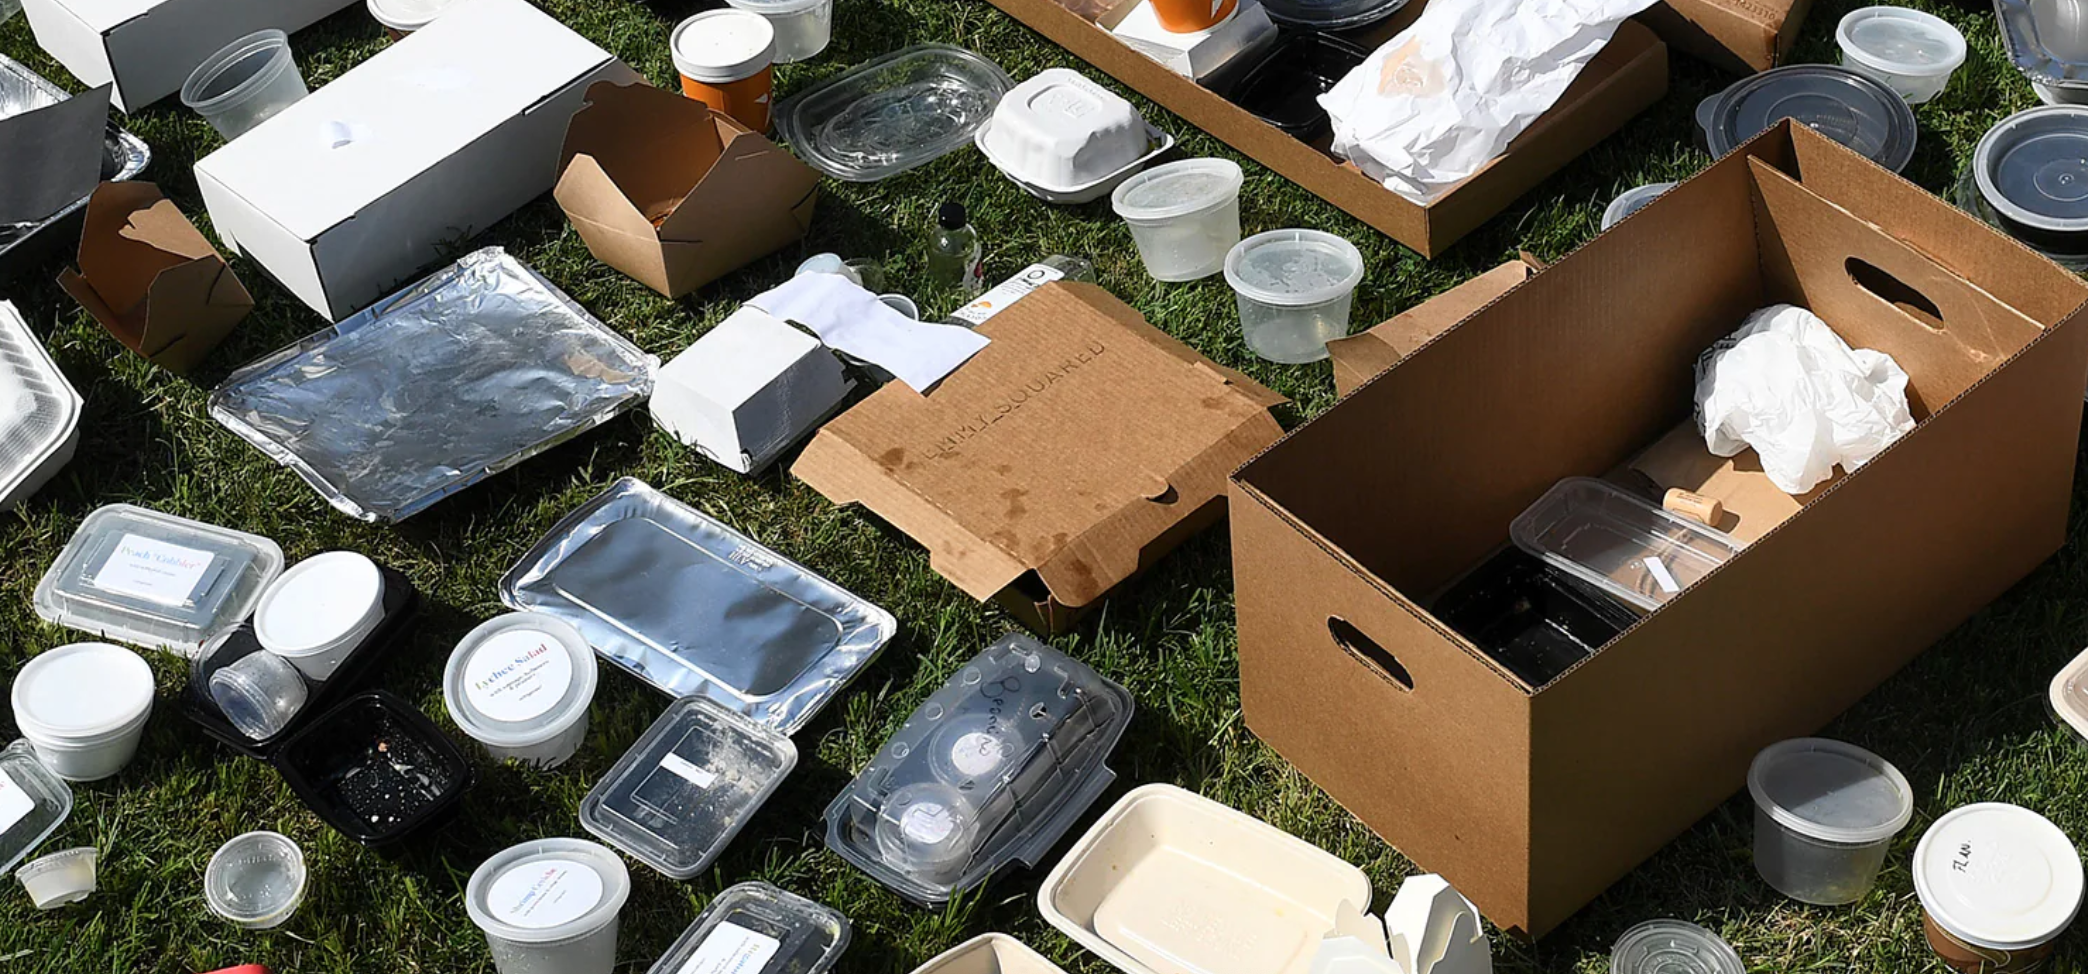 piles of takeout containers on a lawn